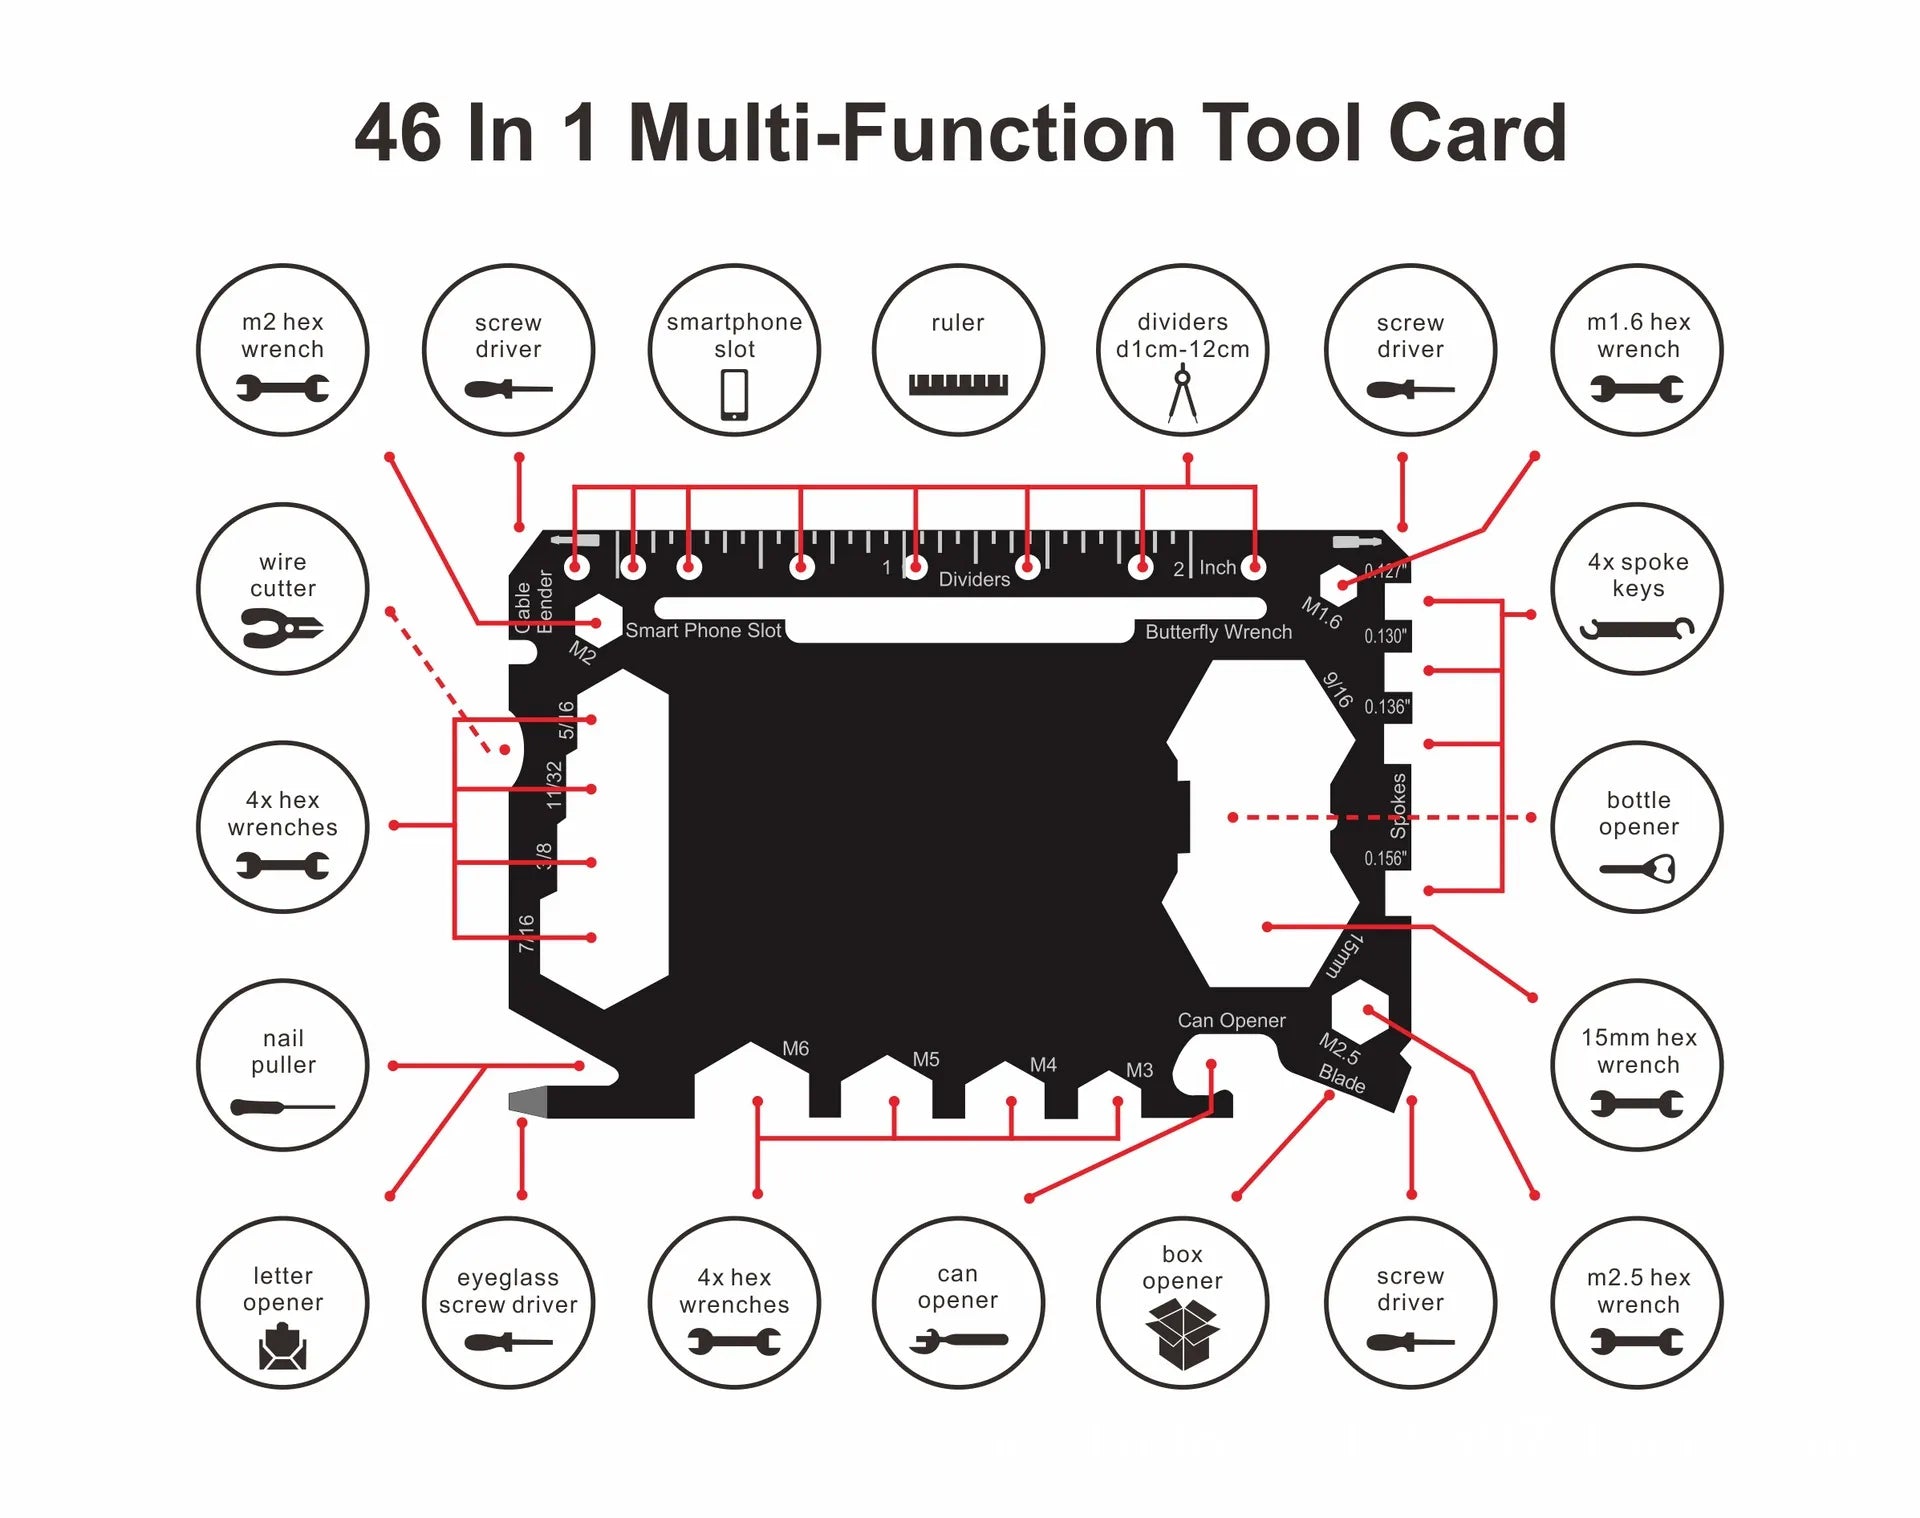 Commander Card - Your Ultimate 46 in 1 EDC MultiTool